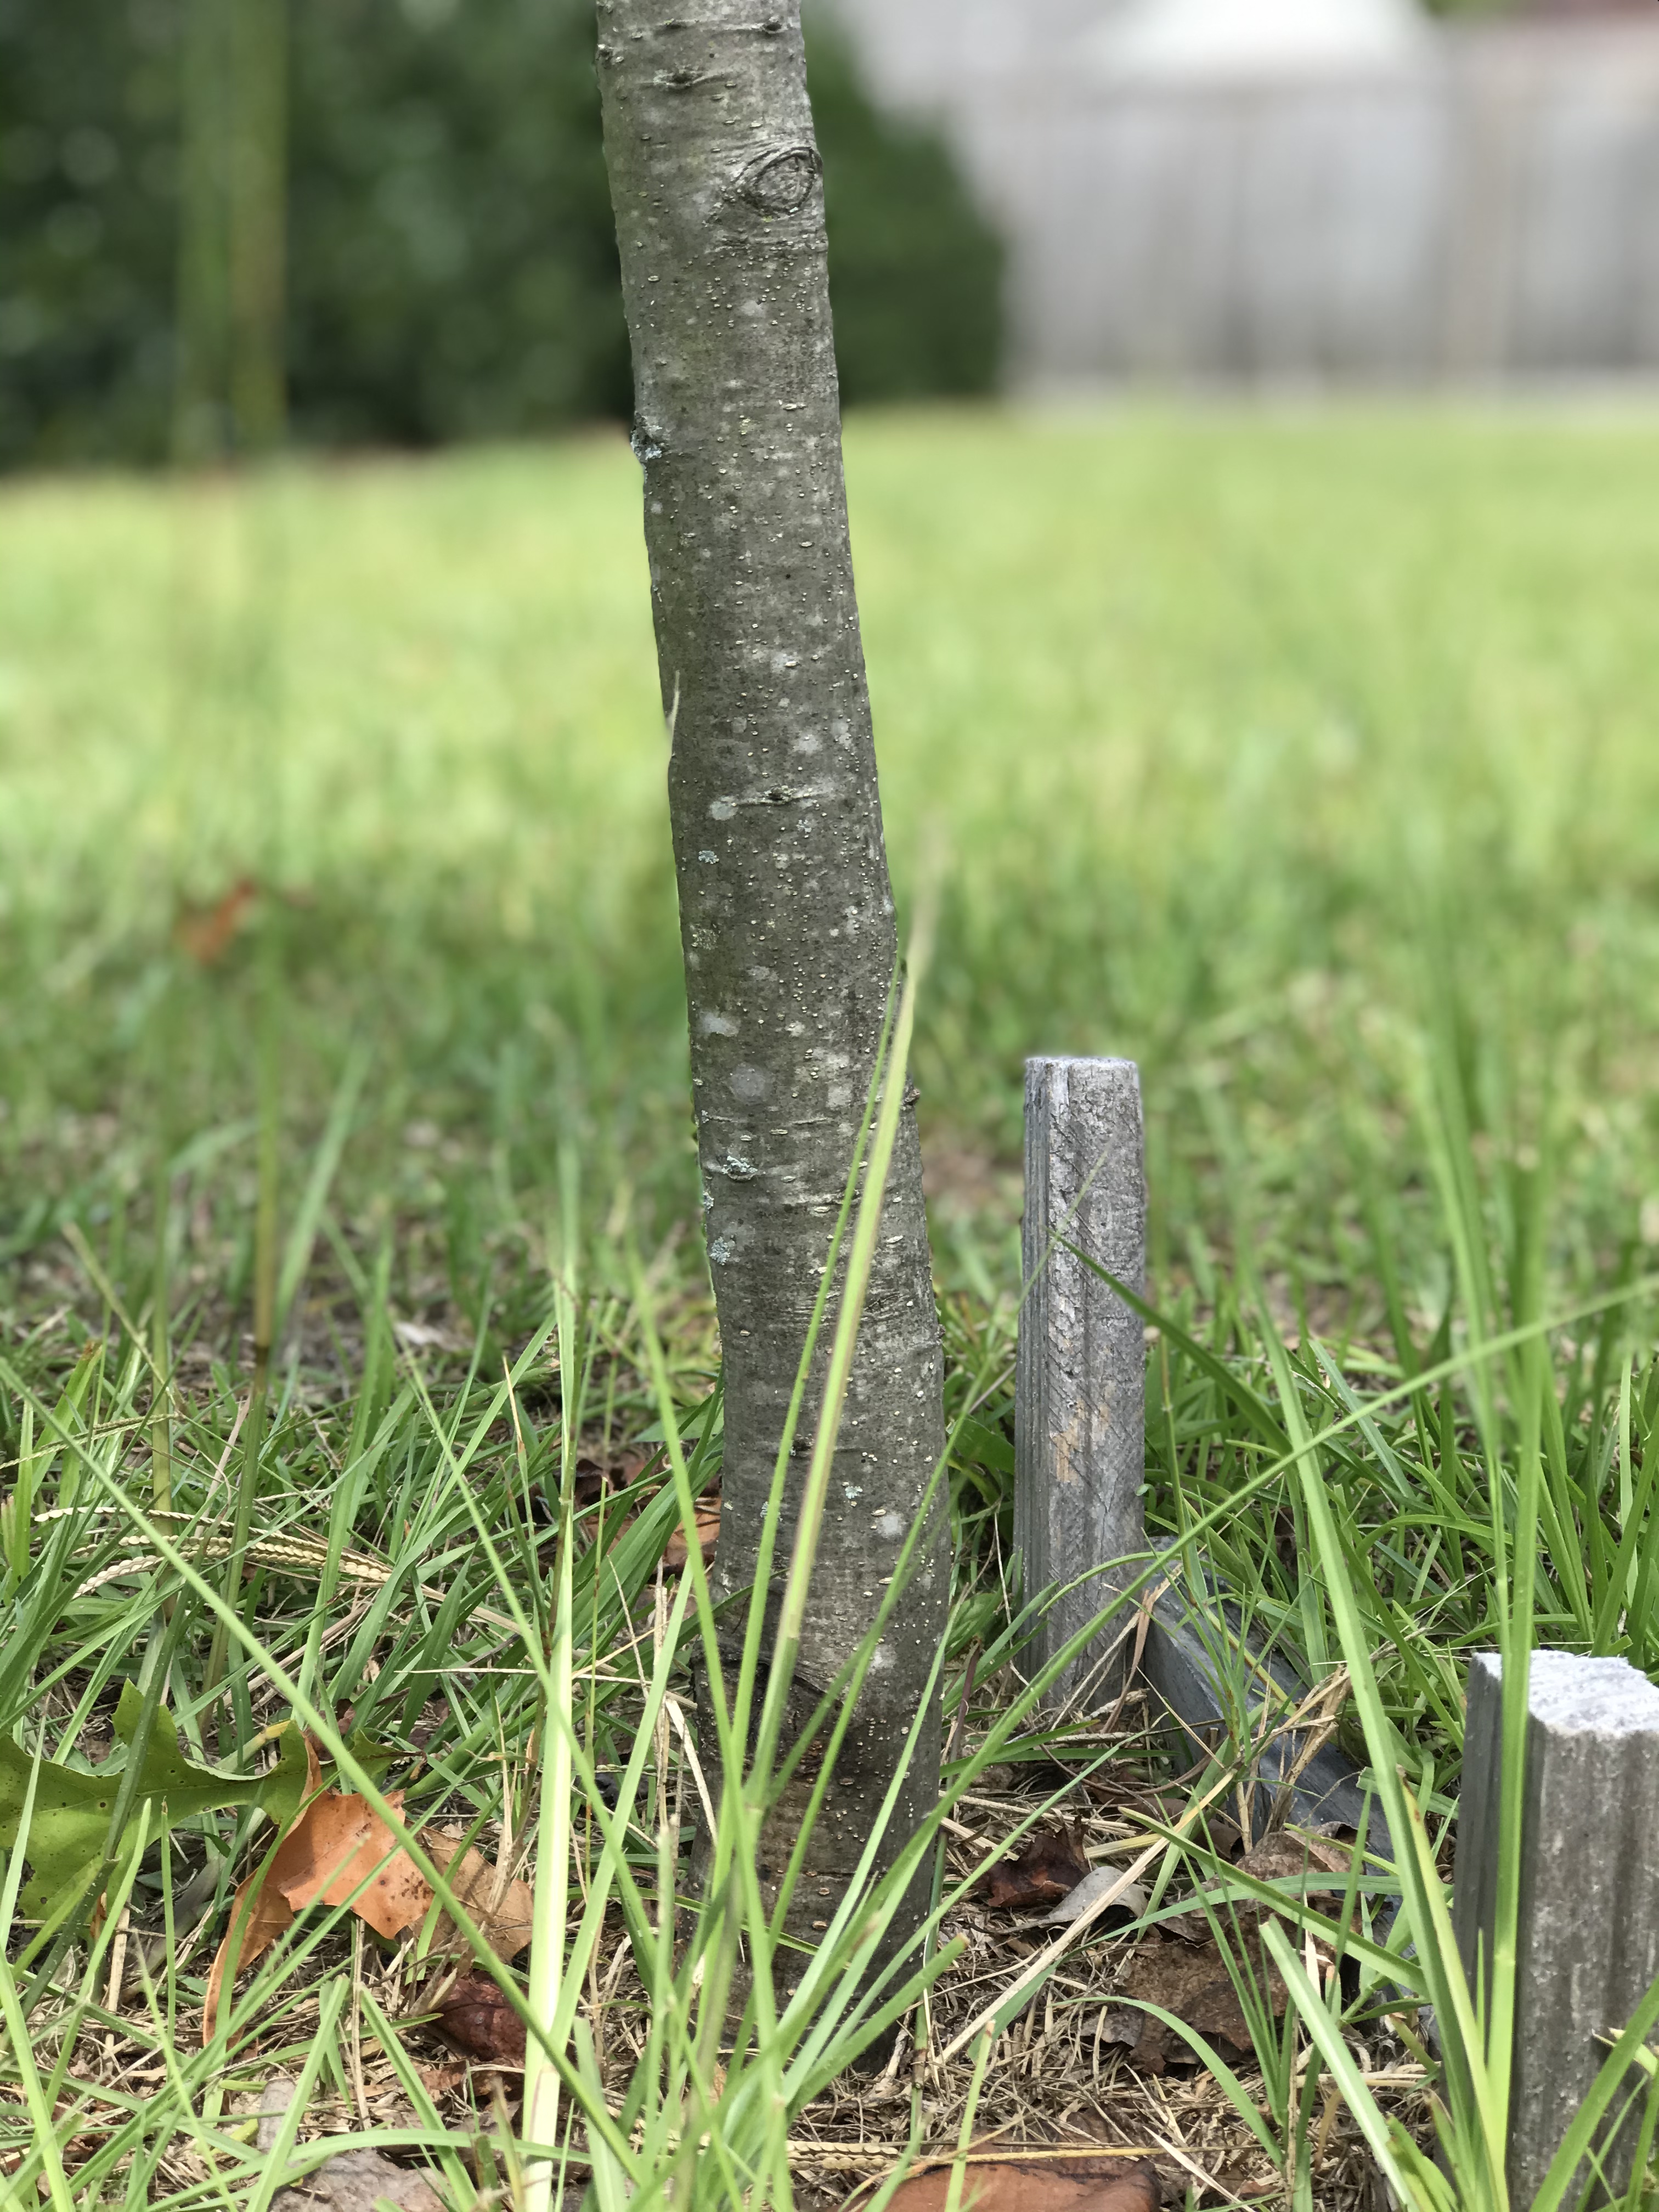 This alternate method of staking holds the root ball down without using above ground materials that can be unsightly and trip hazards. These stakes breakdown naturally, and do not need to be removed. Photo by Katy Shook 